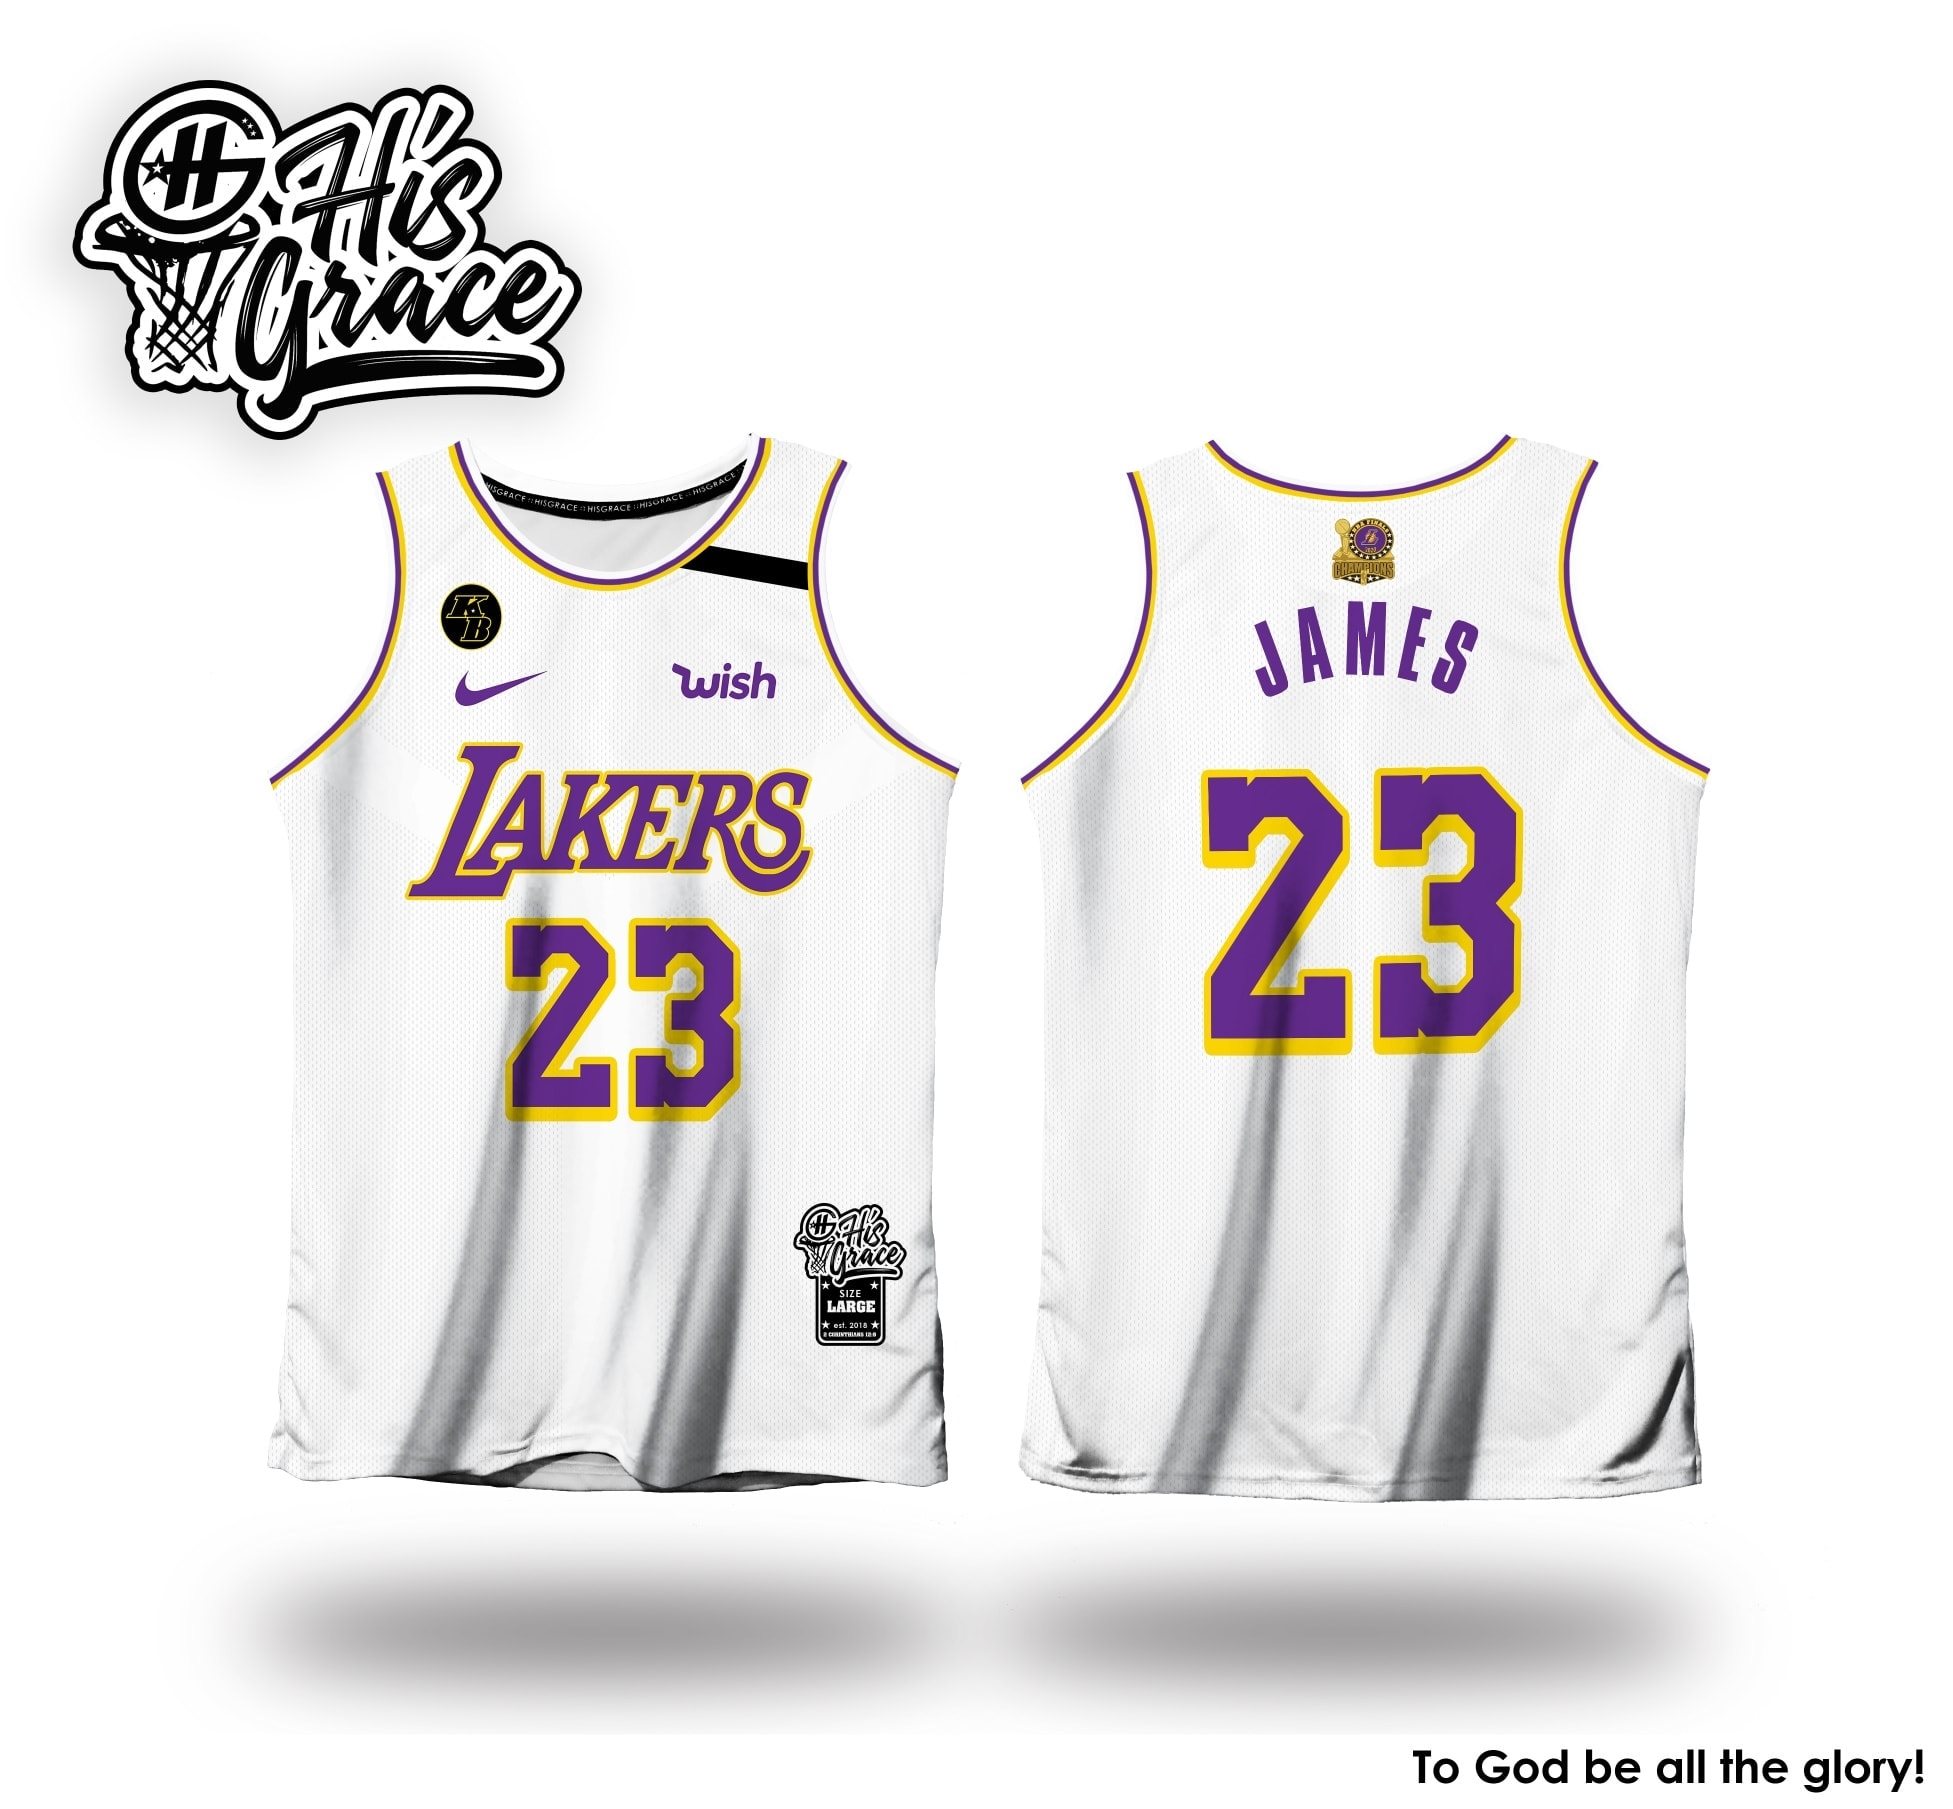 Sale > lakers all white jersey > in stock